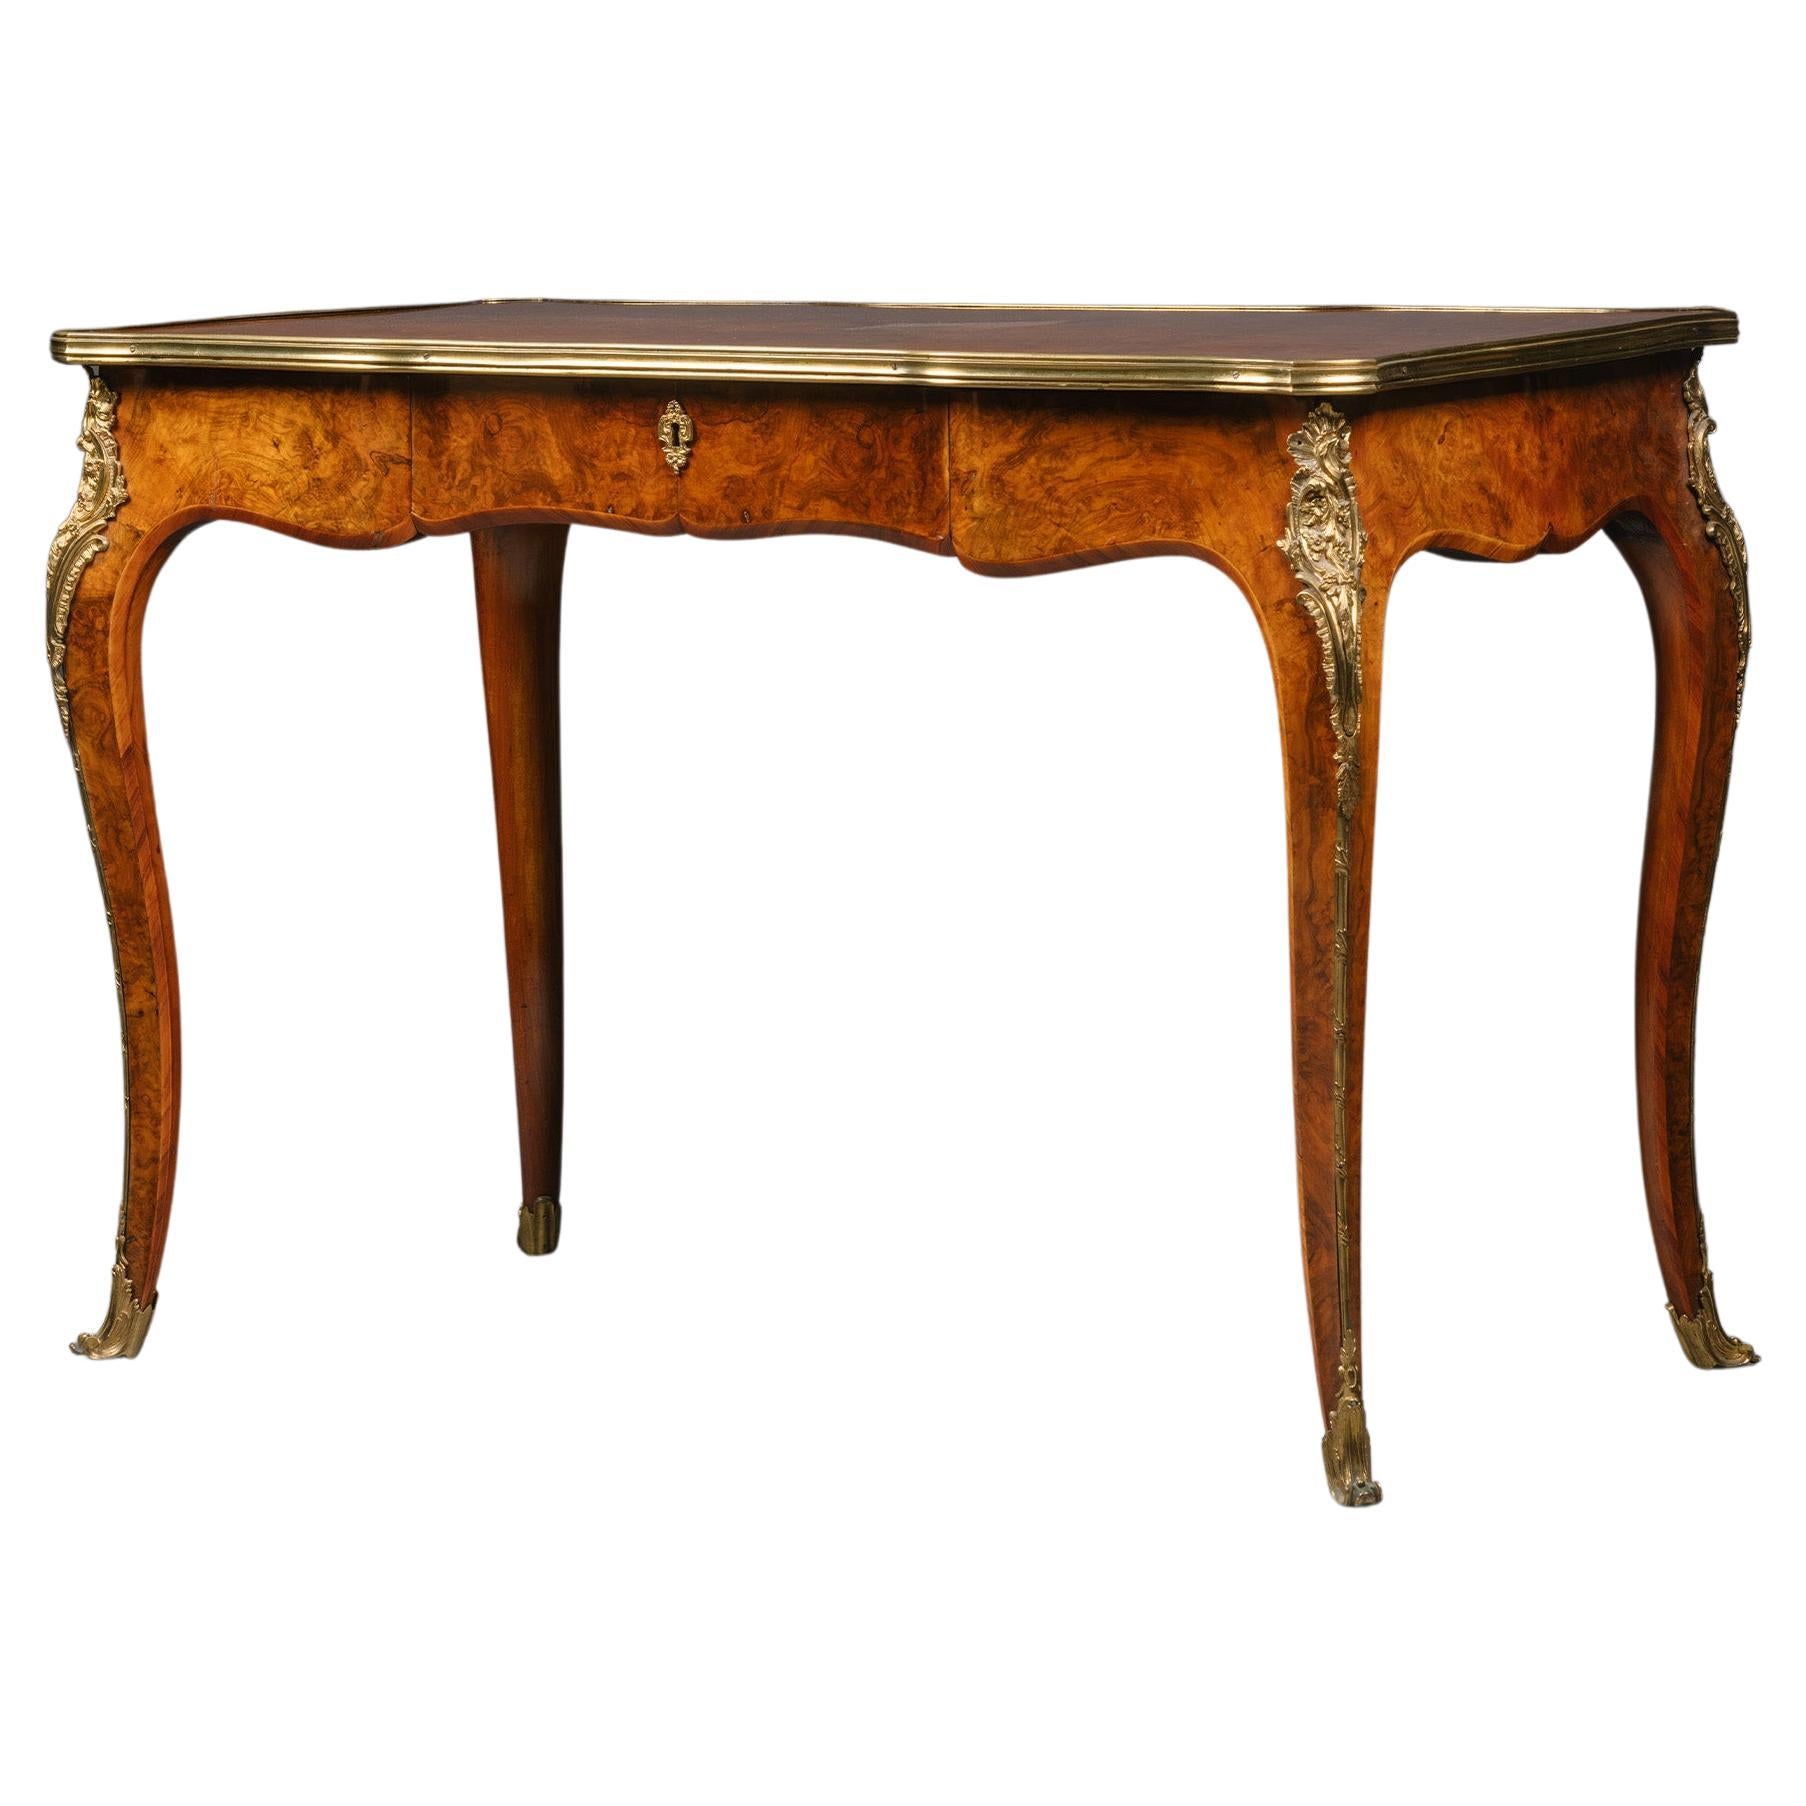 Gilt-Bronze Mounted Burr Walnut Writing Table, Probably by Gillows For Sale